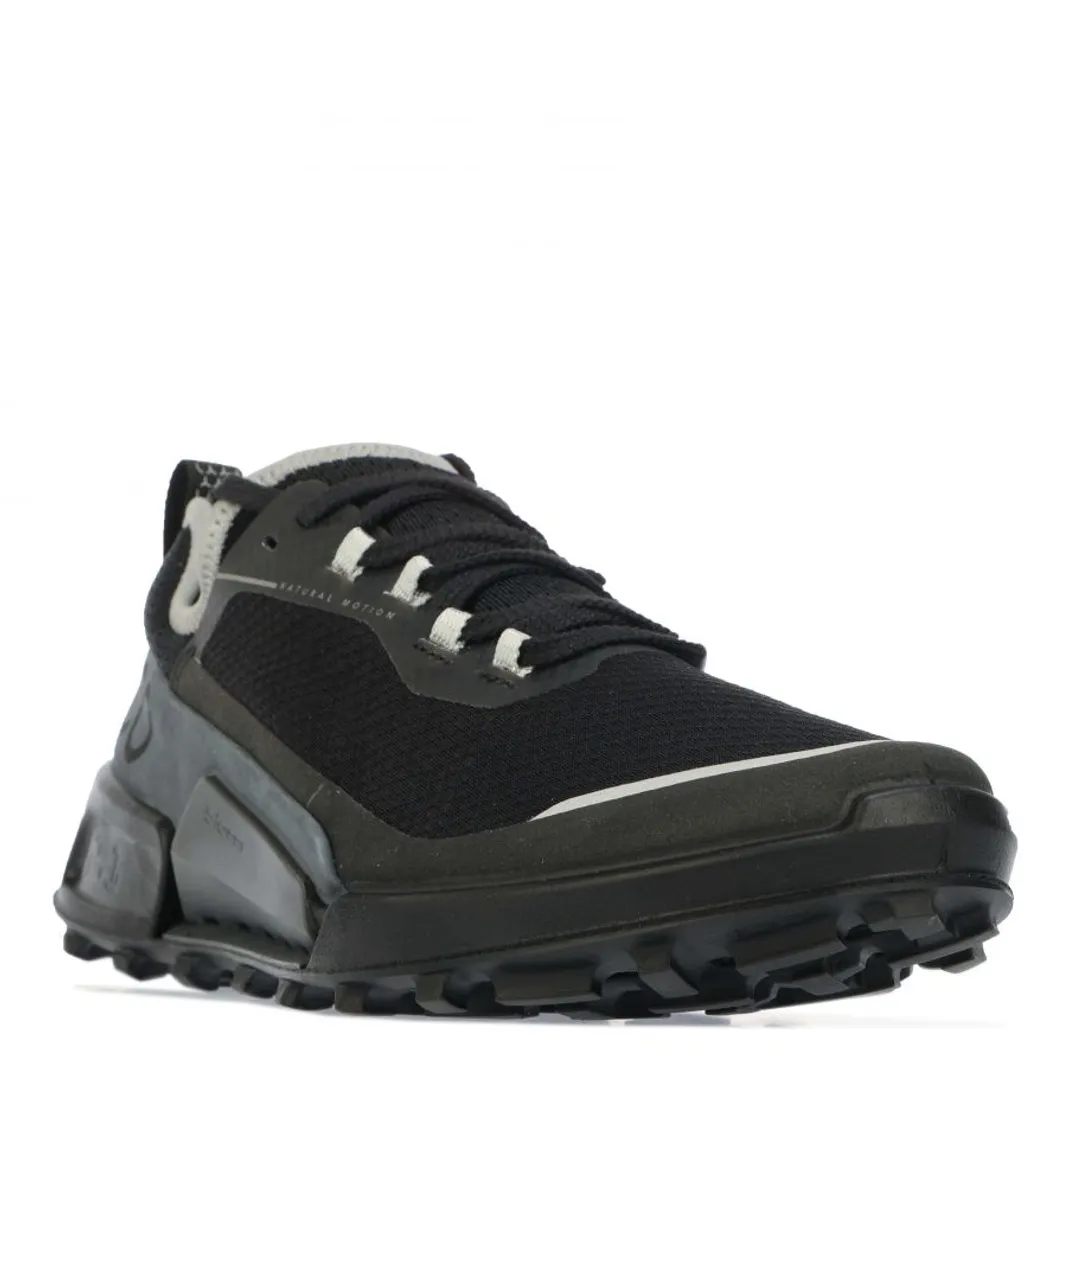 Ecco Womenss Biom 2.1 Mountain Trainers in Black Leather (archived)